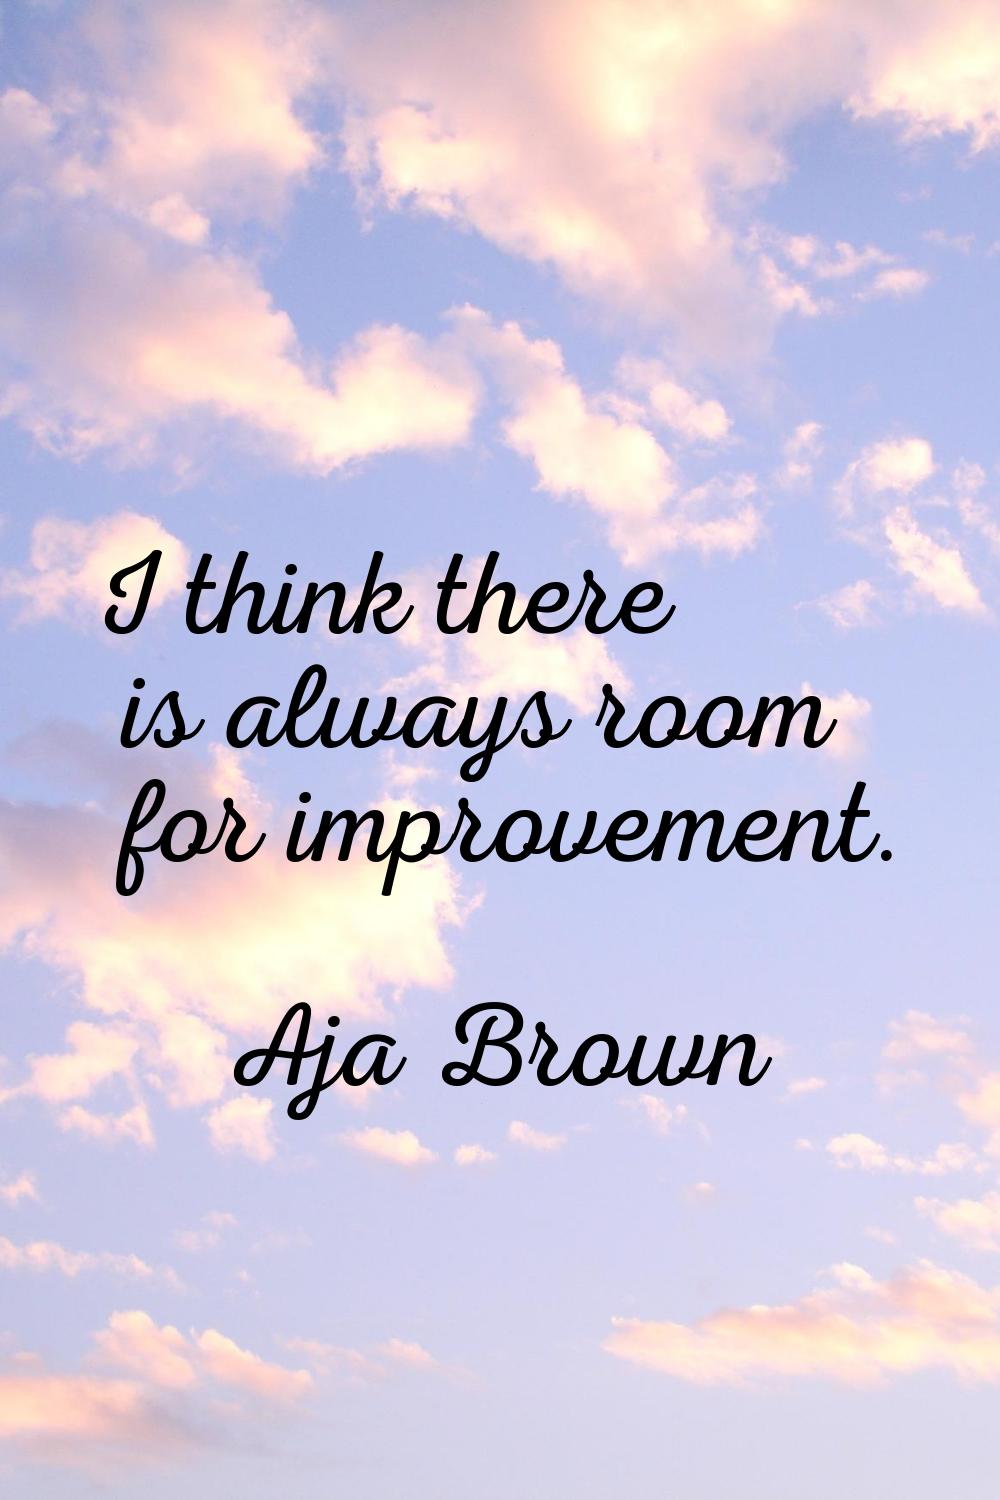 I think there is always room for improvement.